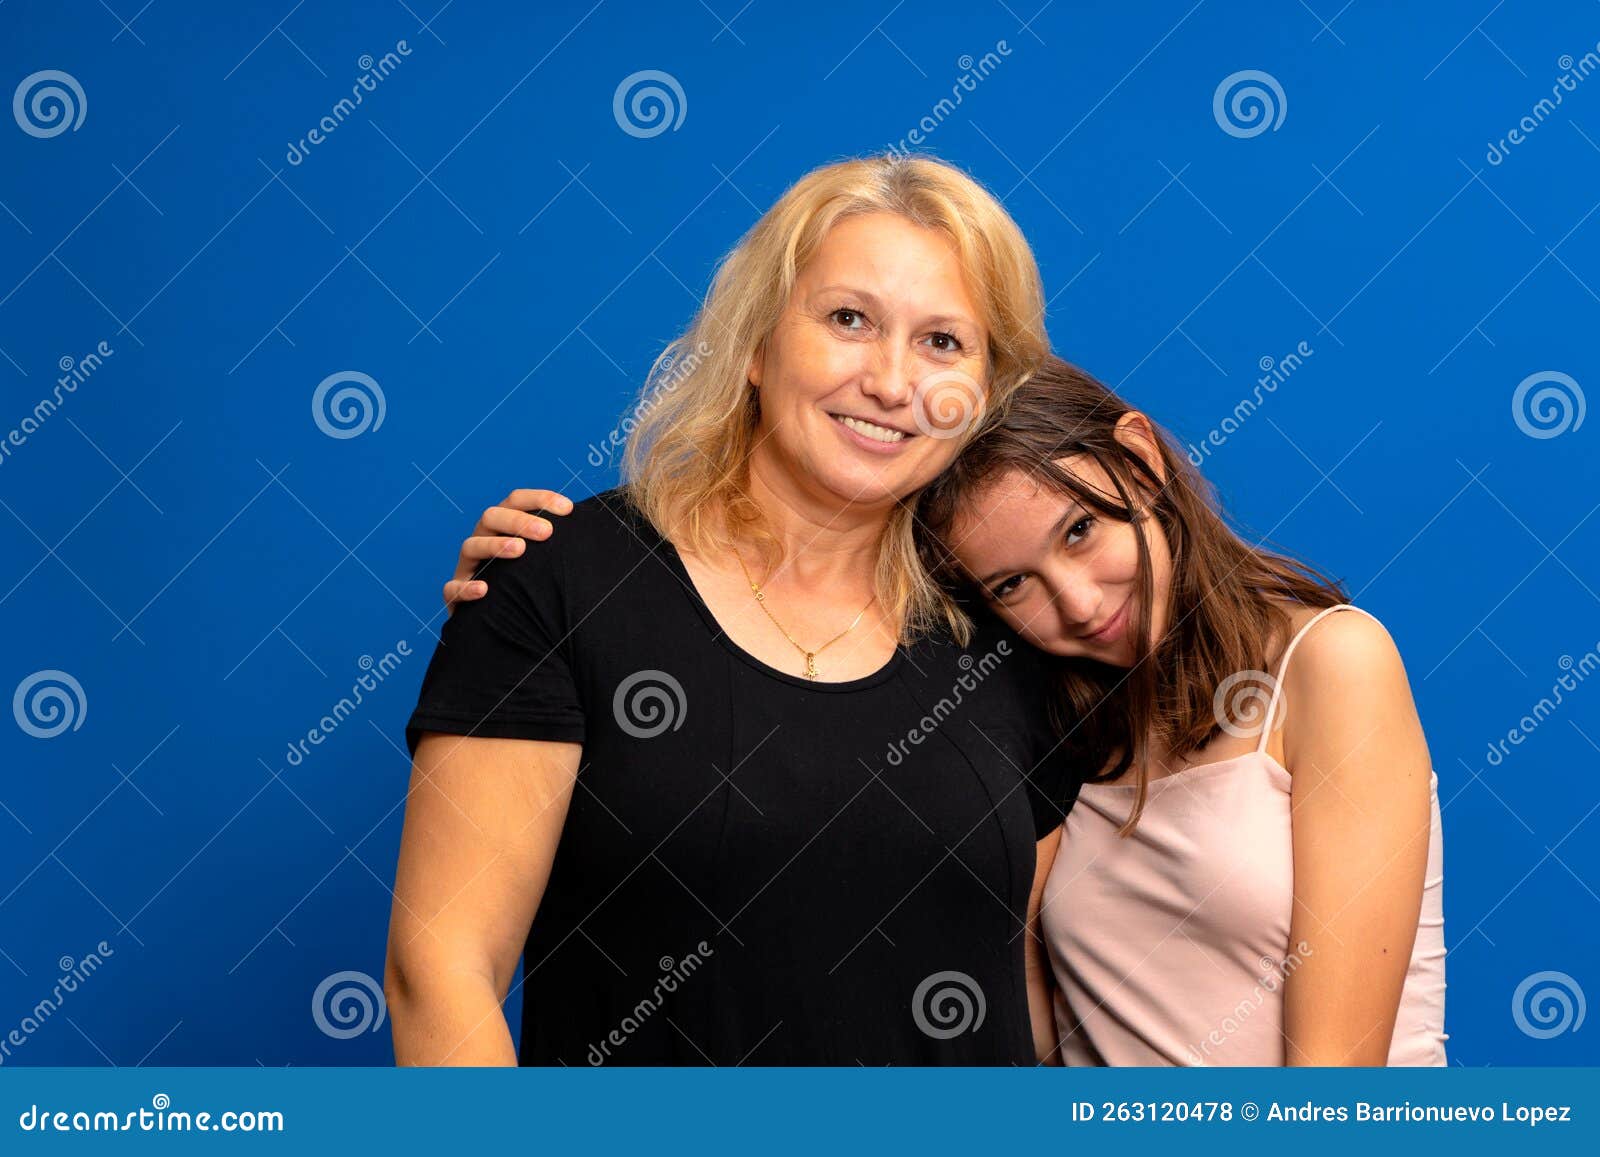 headshot portrait of a smiling multiracial family of different female generations. happy caucasian mother in her 40s